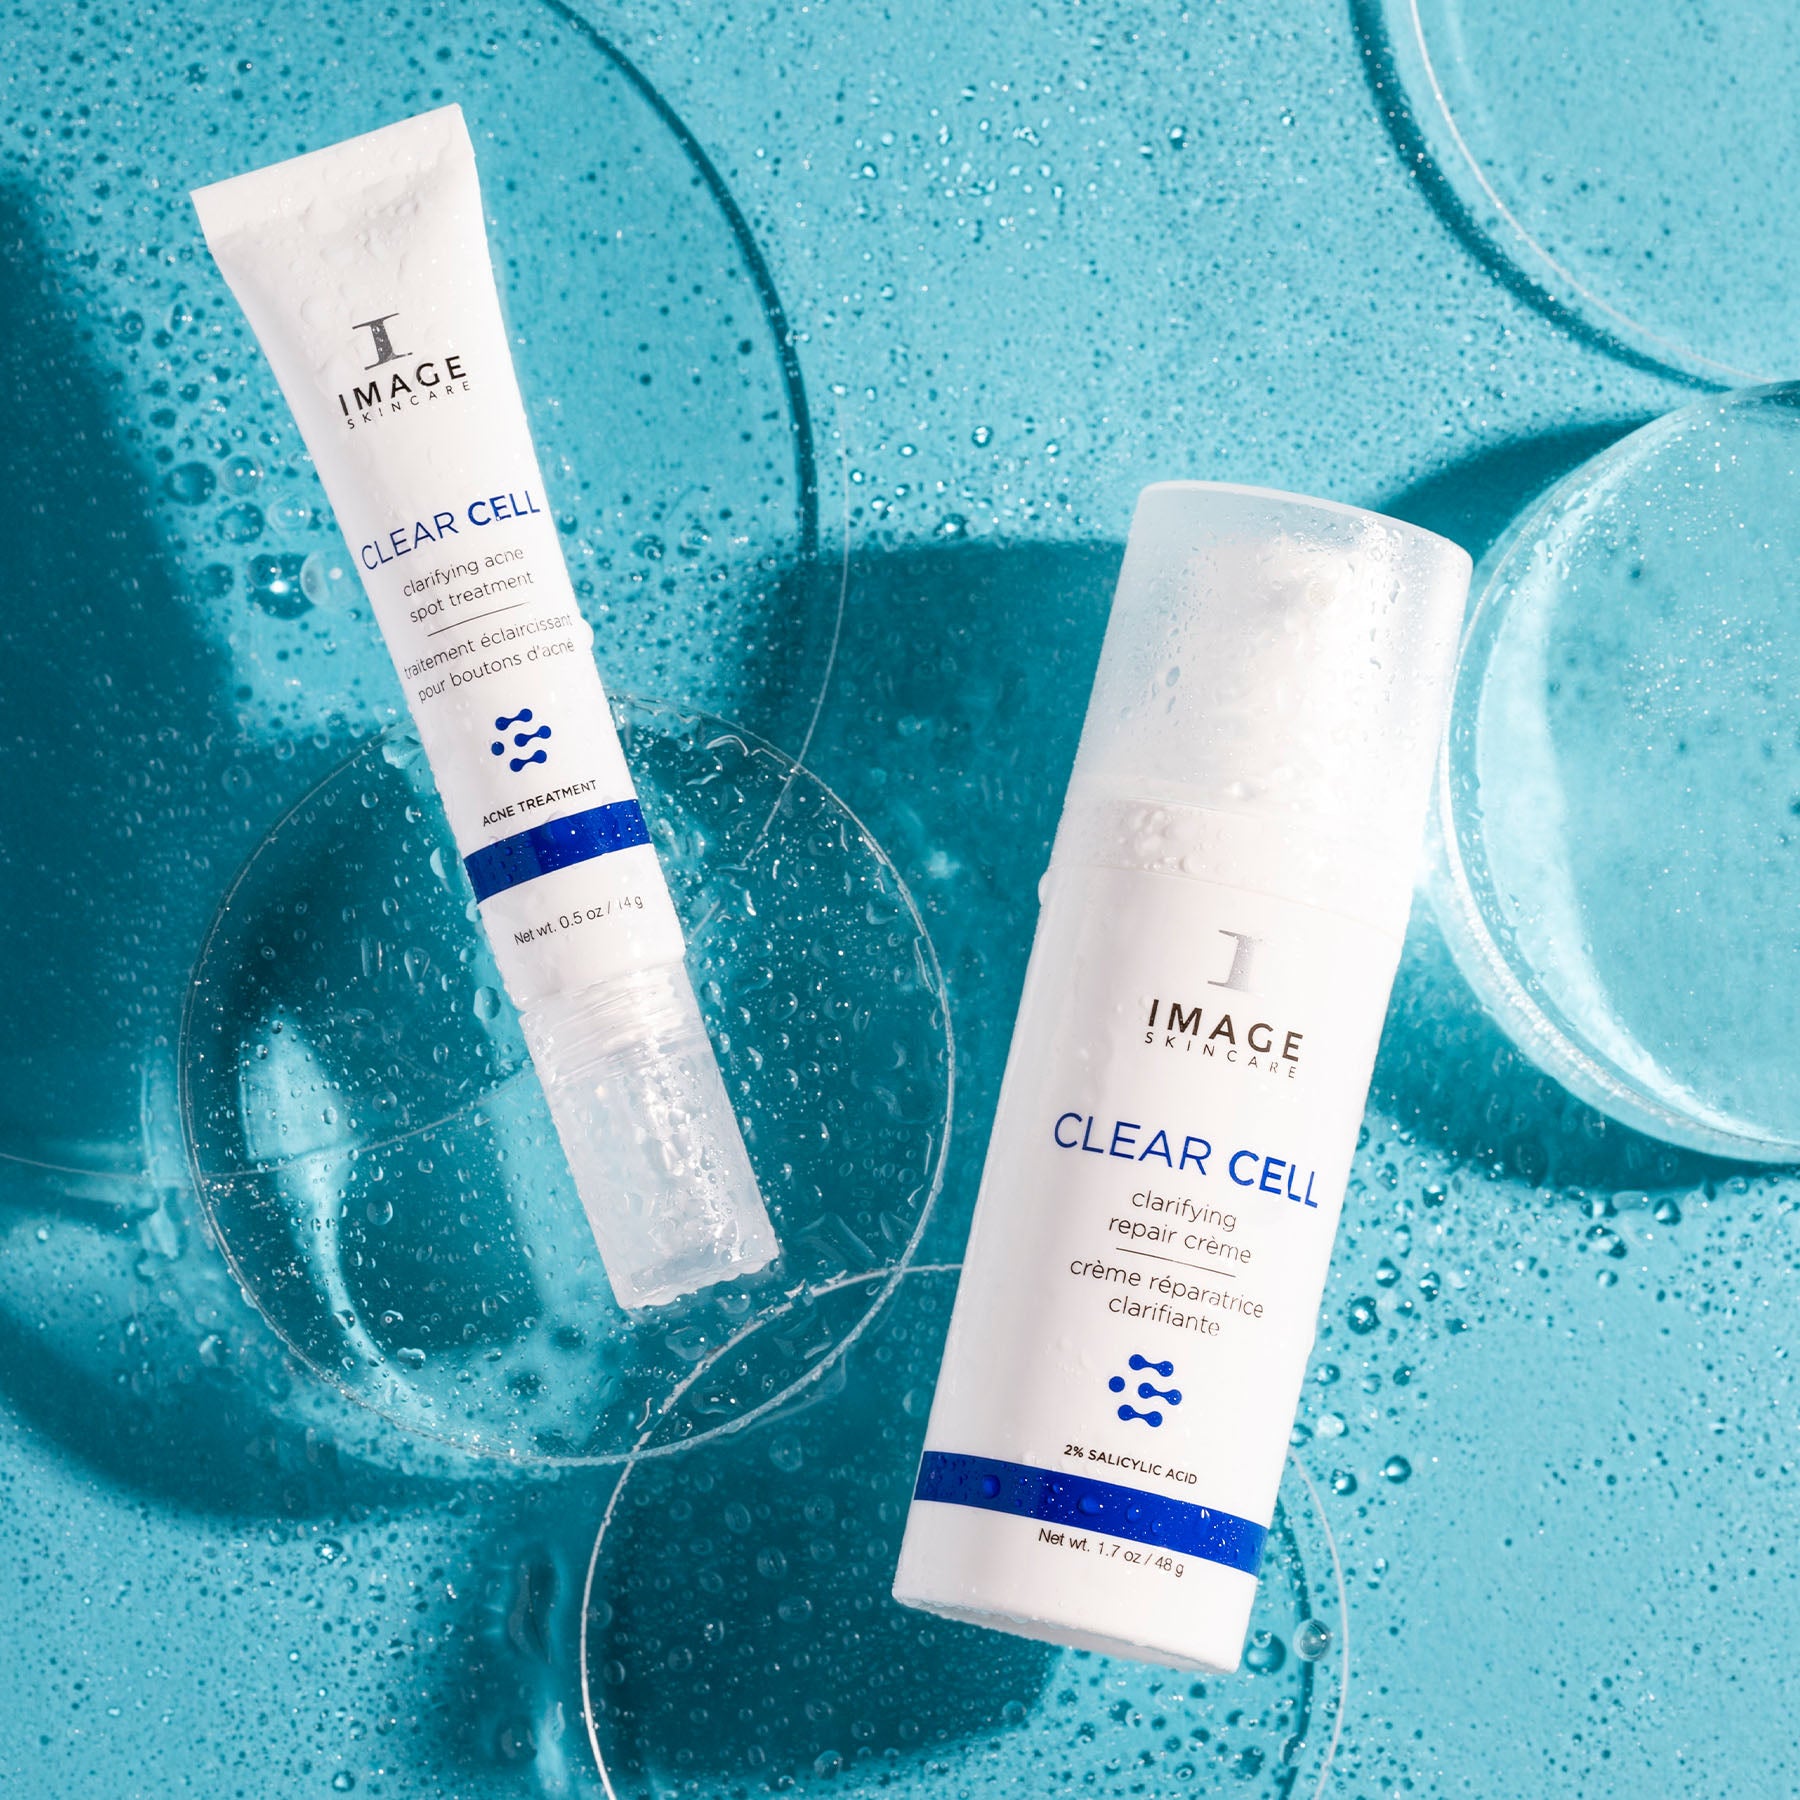 CLEAR CELL clarifying acne spot treatment and repair creme 